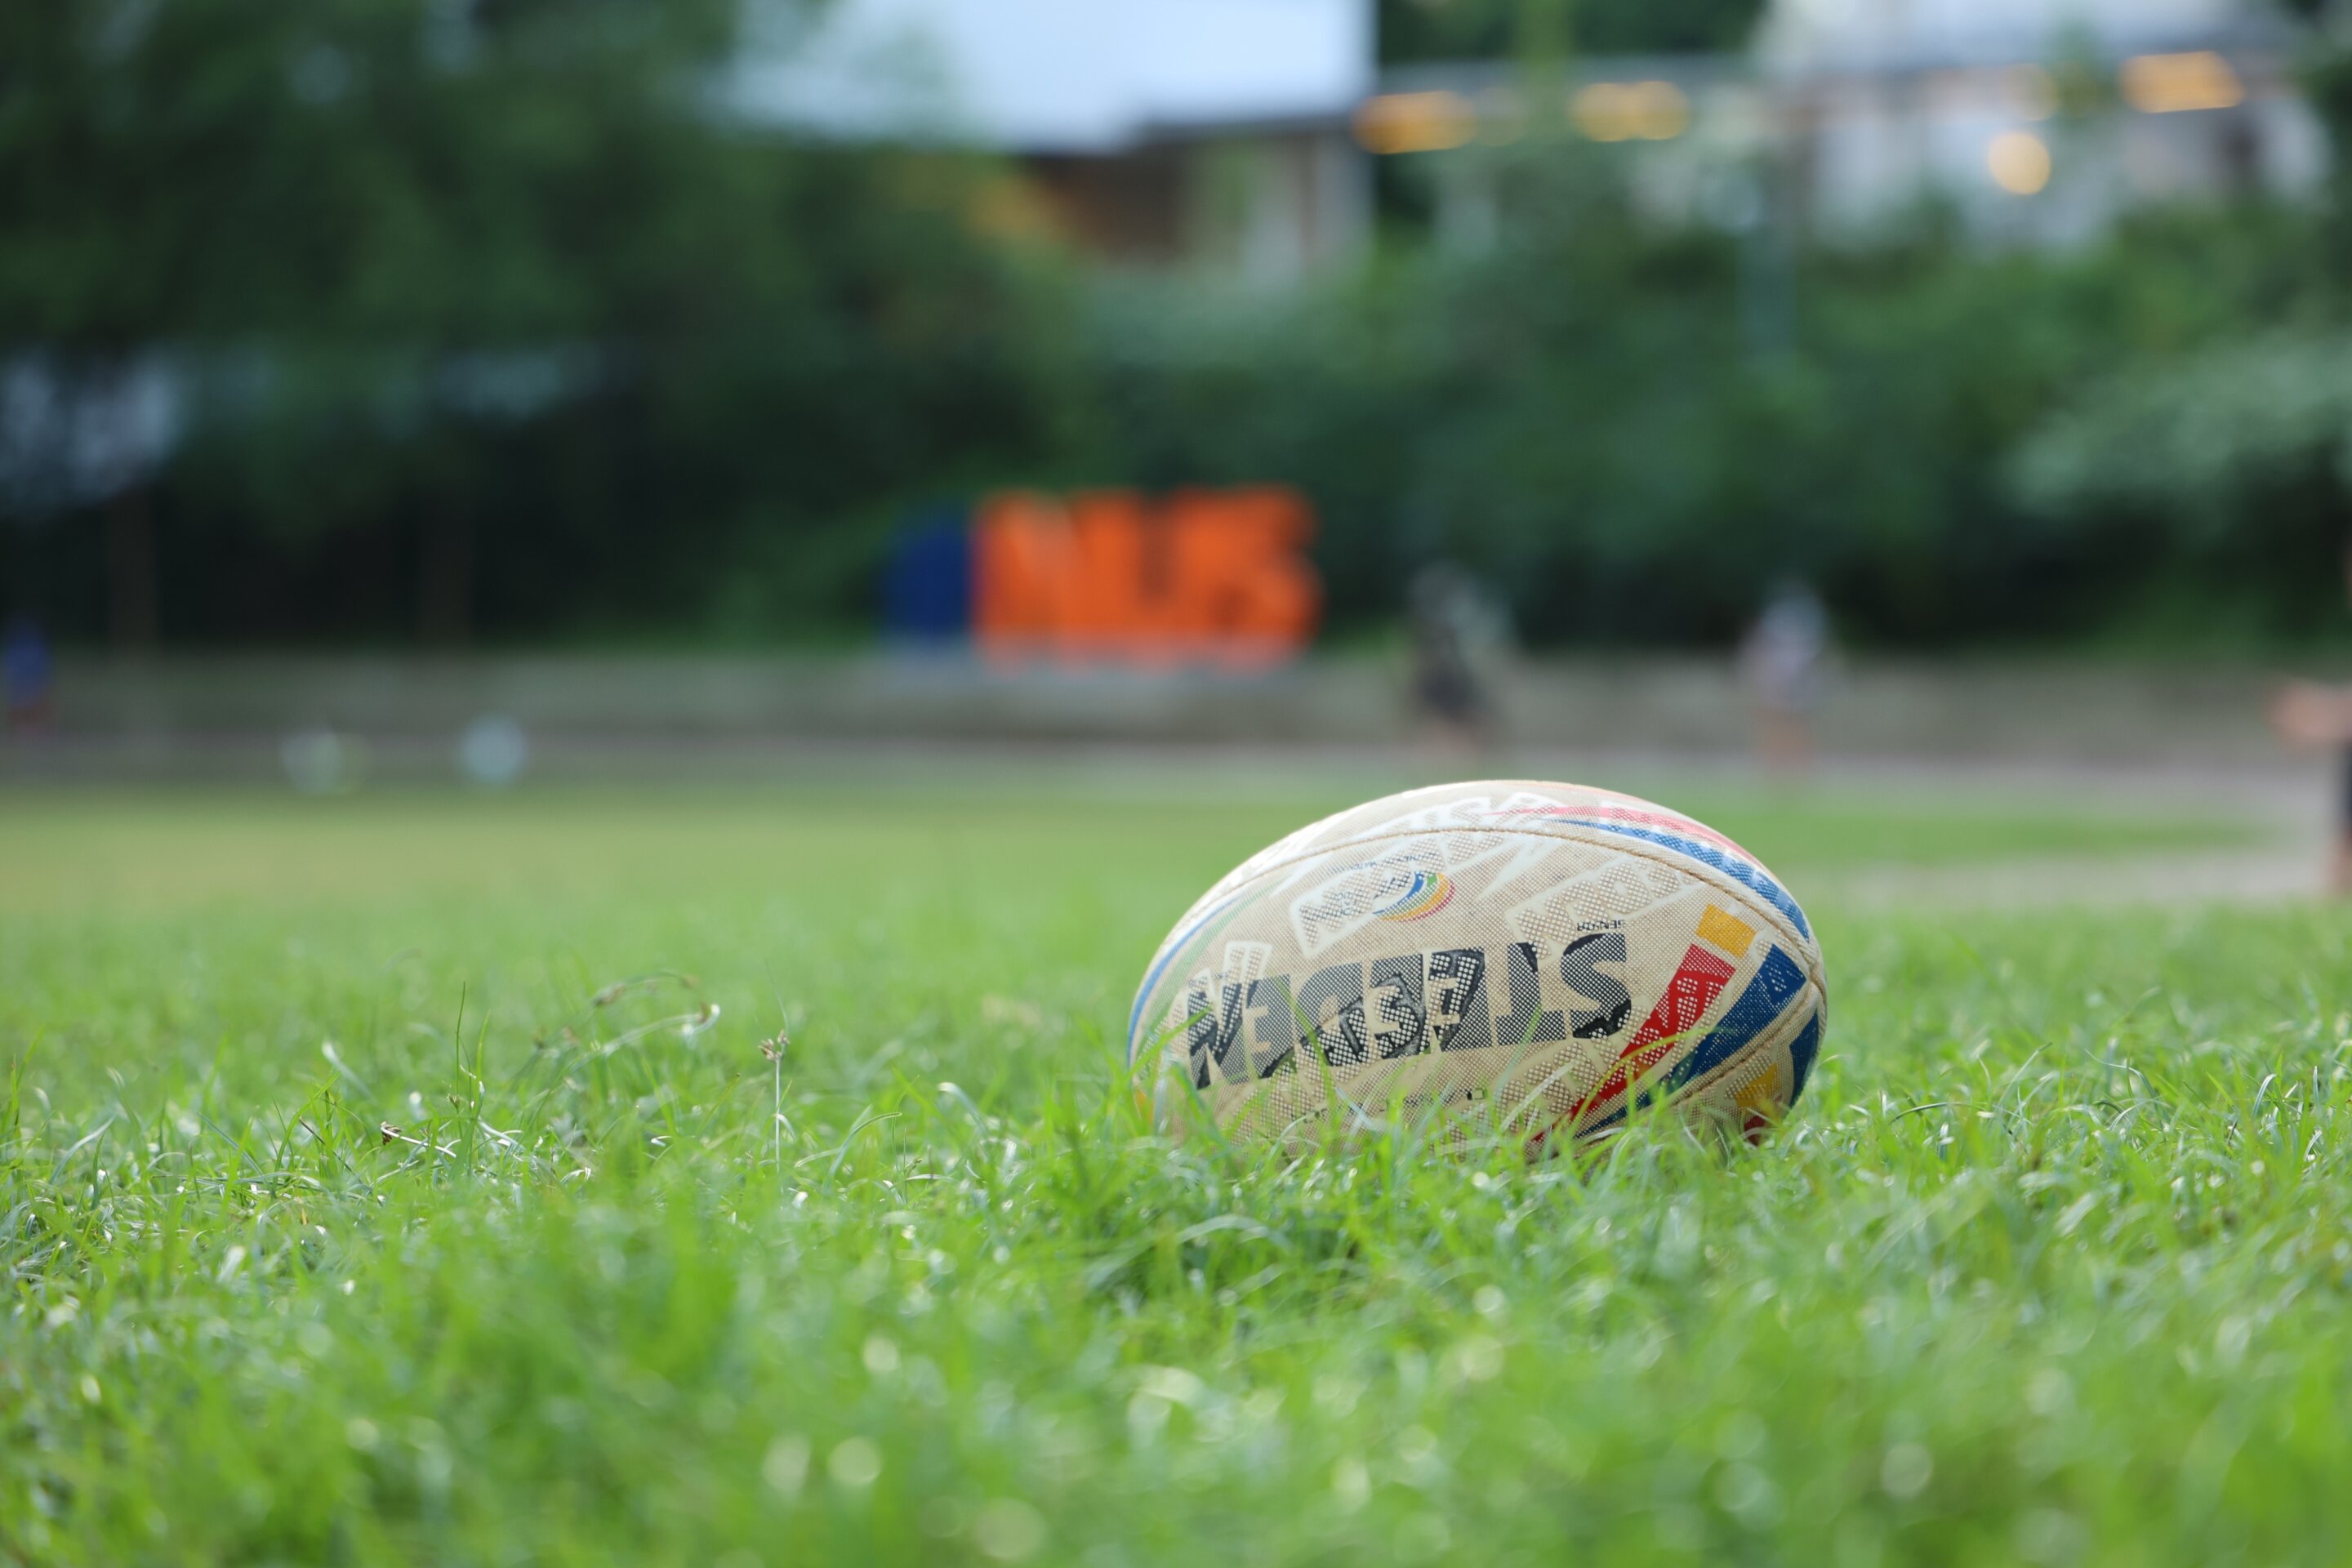 #Rugby players face highly increased MND risk: disease study